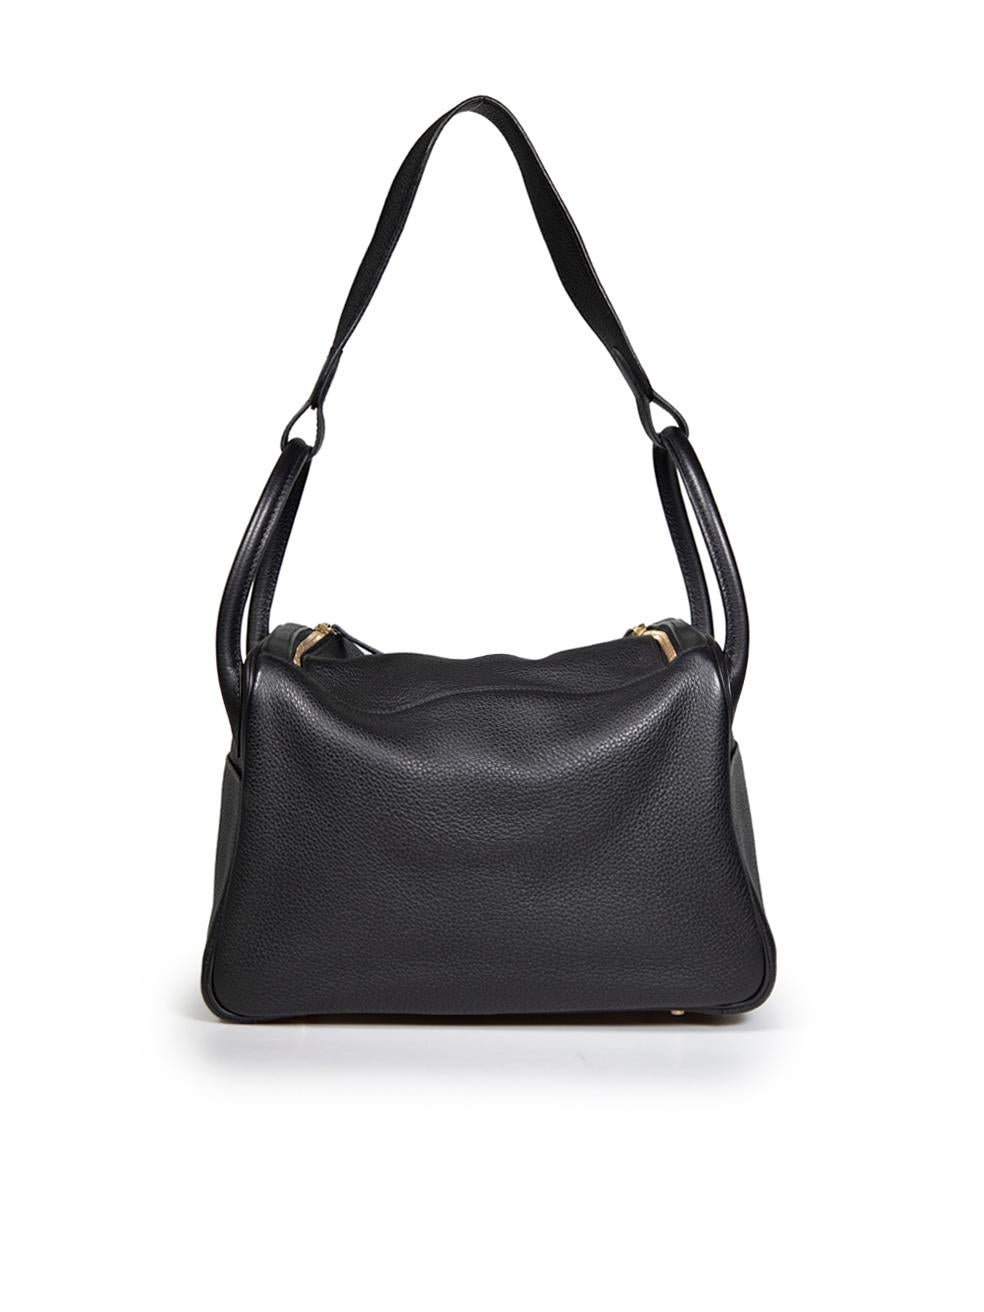 Hermès 2007 Noir Togo Leather GHW Lindy 26 Bag In Good Condition For Sale In London, GB